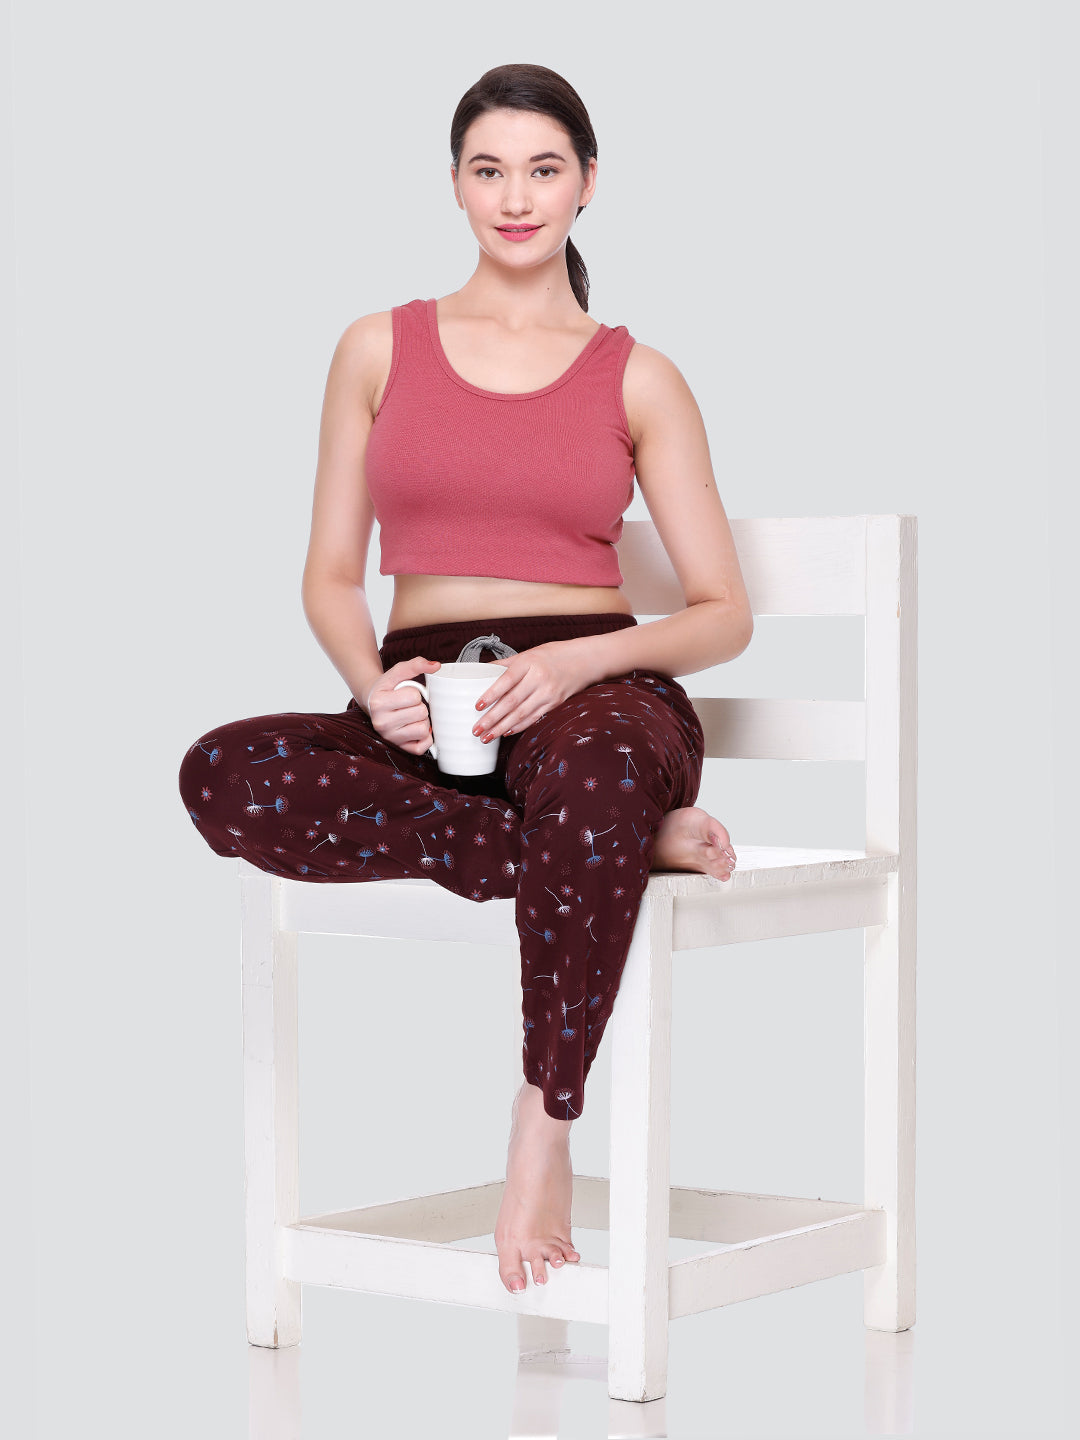 Cupid All Over Print Cotton Lounge Pants for Women ( Wine)